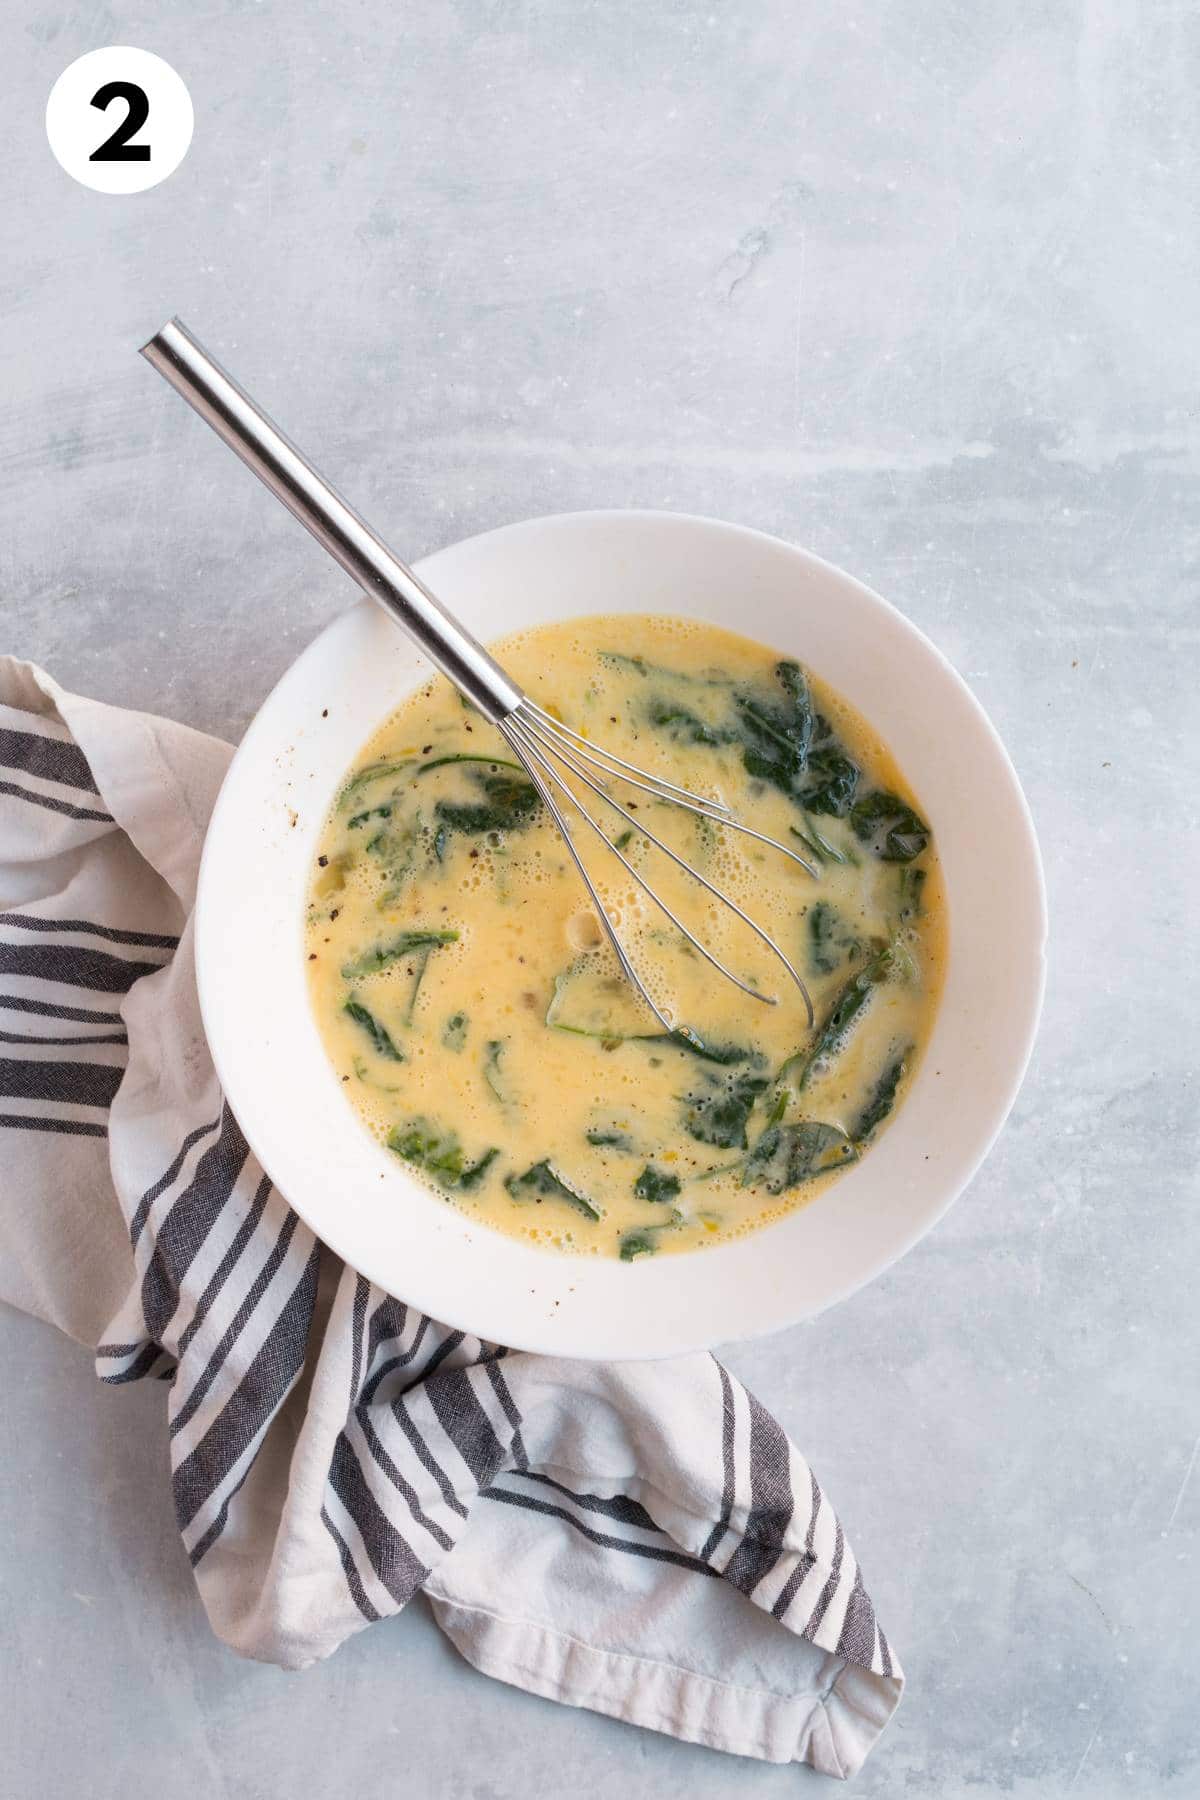 Eggs and spinach mixed in a bowl with a whisk.